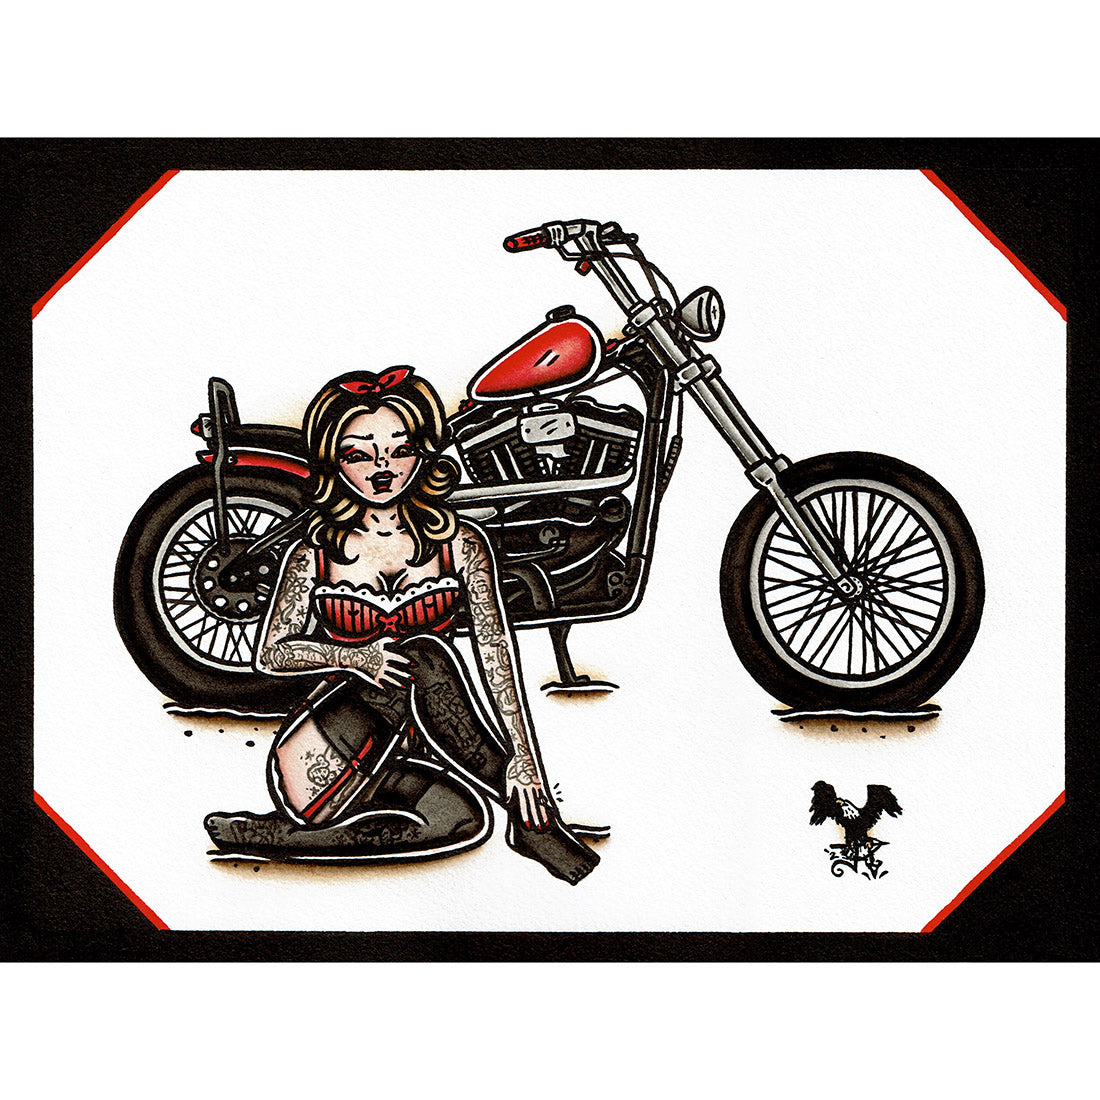 American traditional tattoo flash illustration 2016 Harley Davidson Iron 883 Sportster Chopper Pinup watercolor painting.